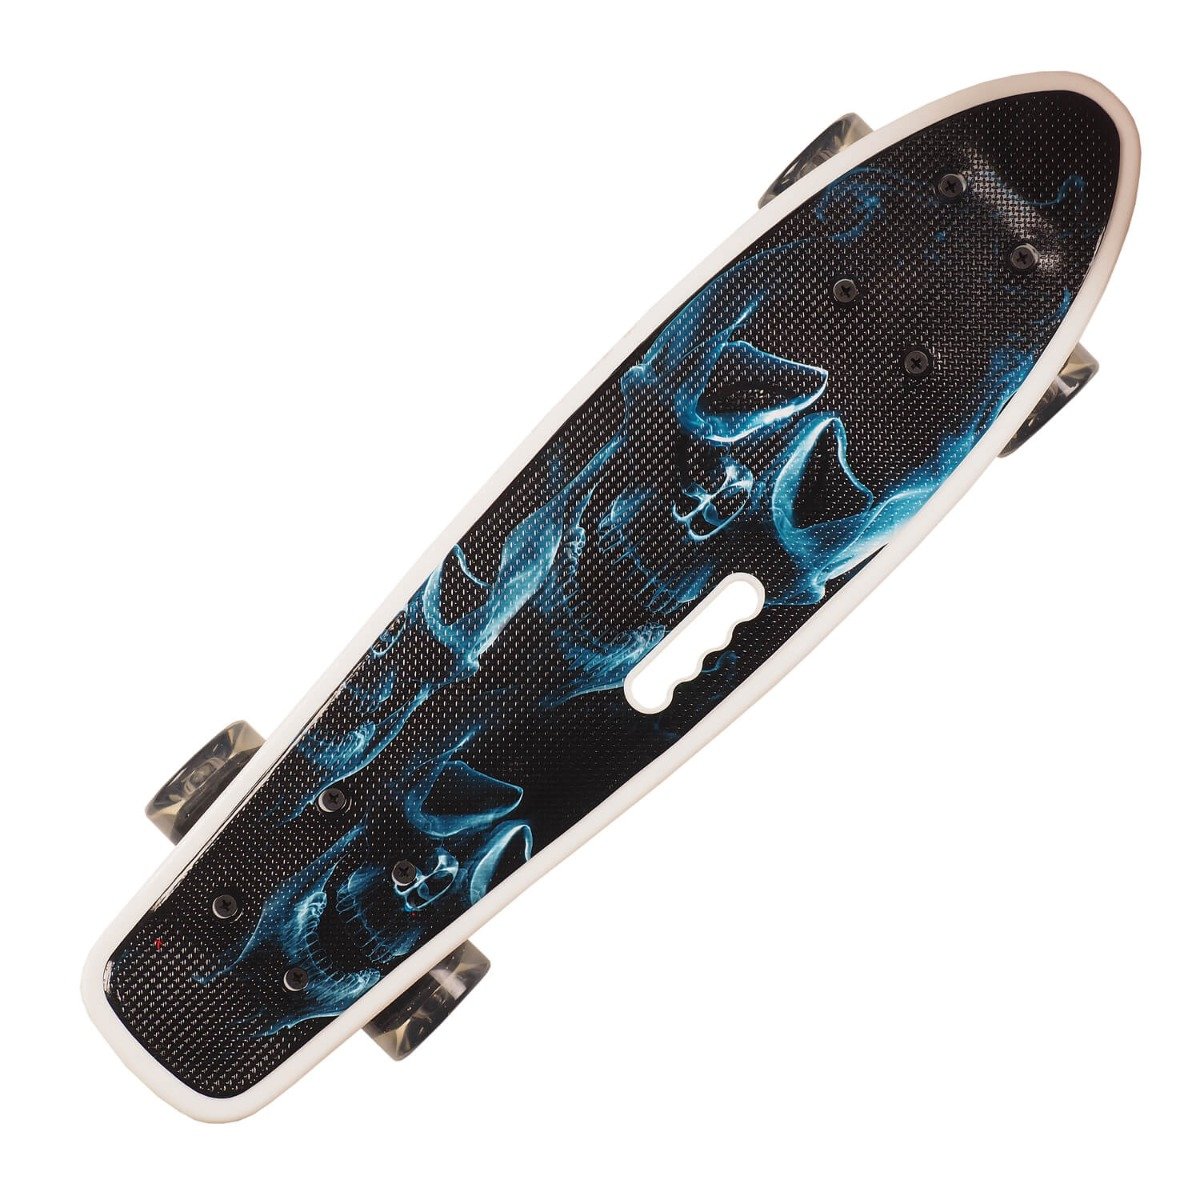 Penny board portabil Action One, Smoke, 22 inch Action